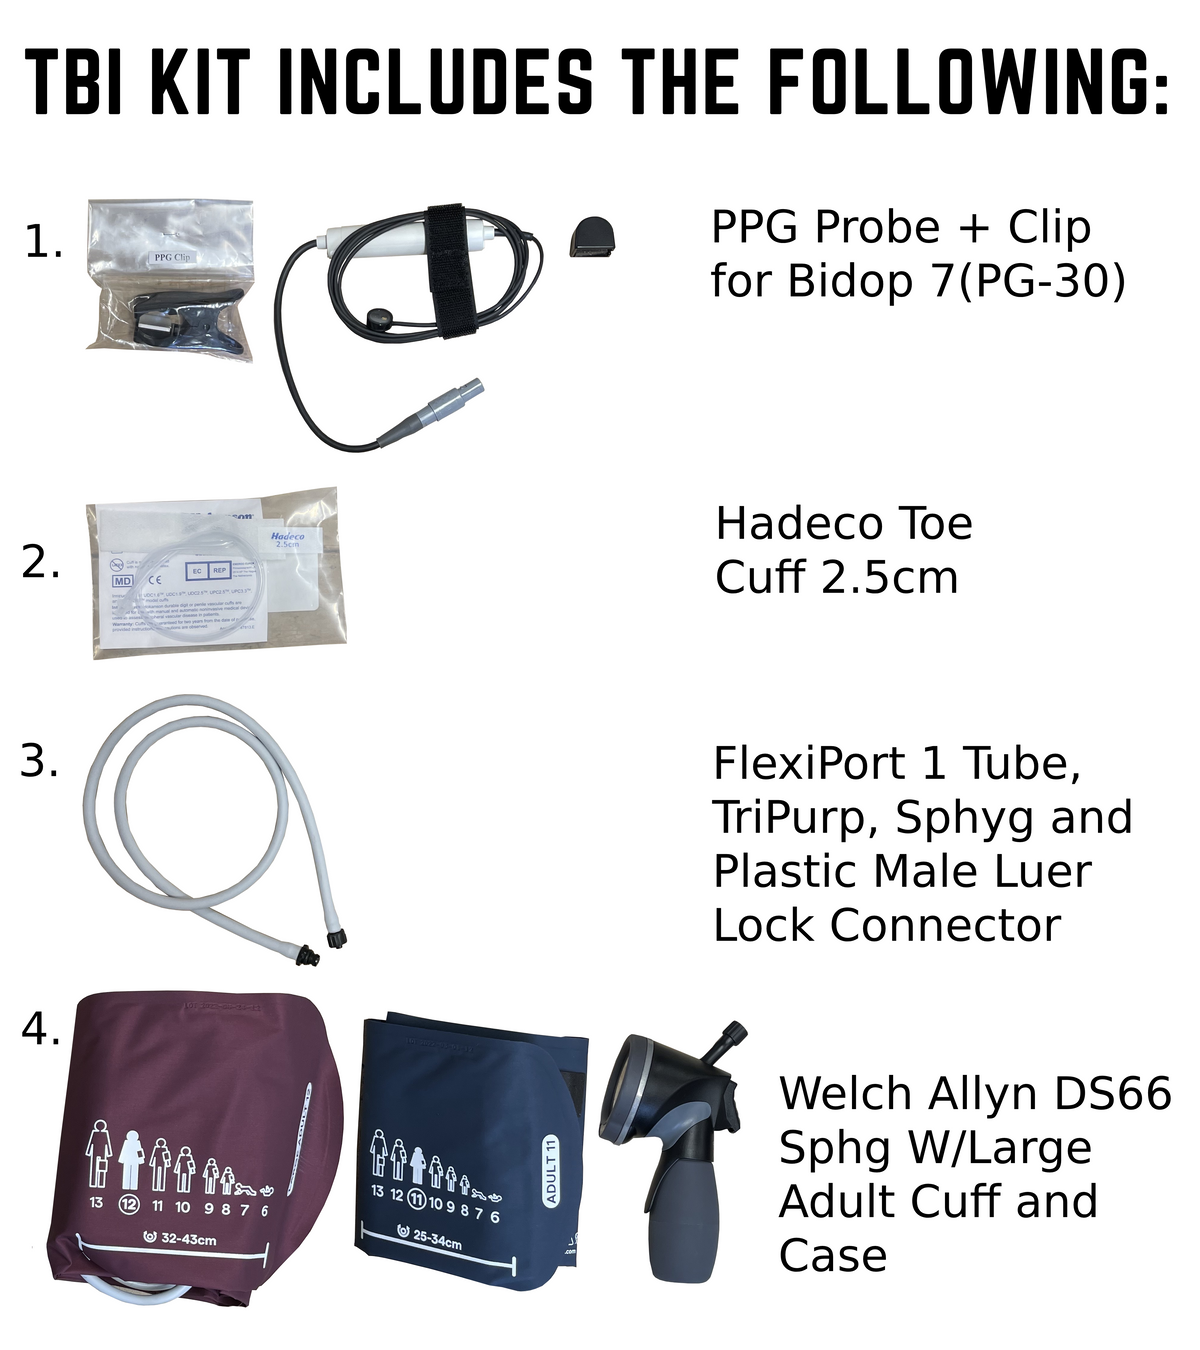 TBI KIT FOR DOPPLER INCLUDES TOE CUFF AND PPG PROBE